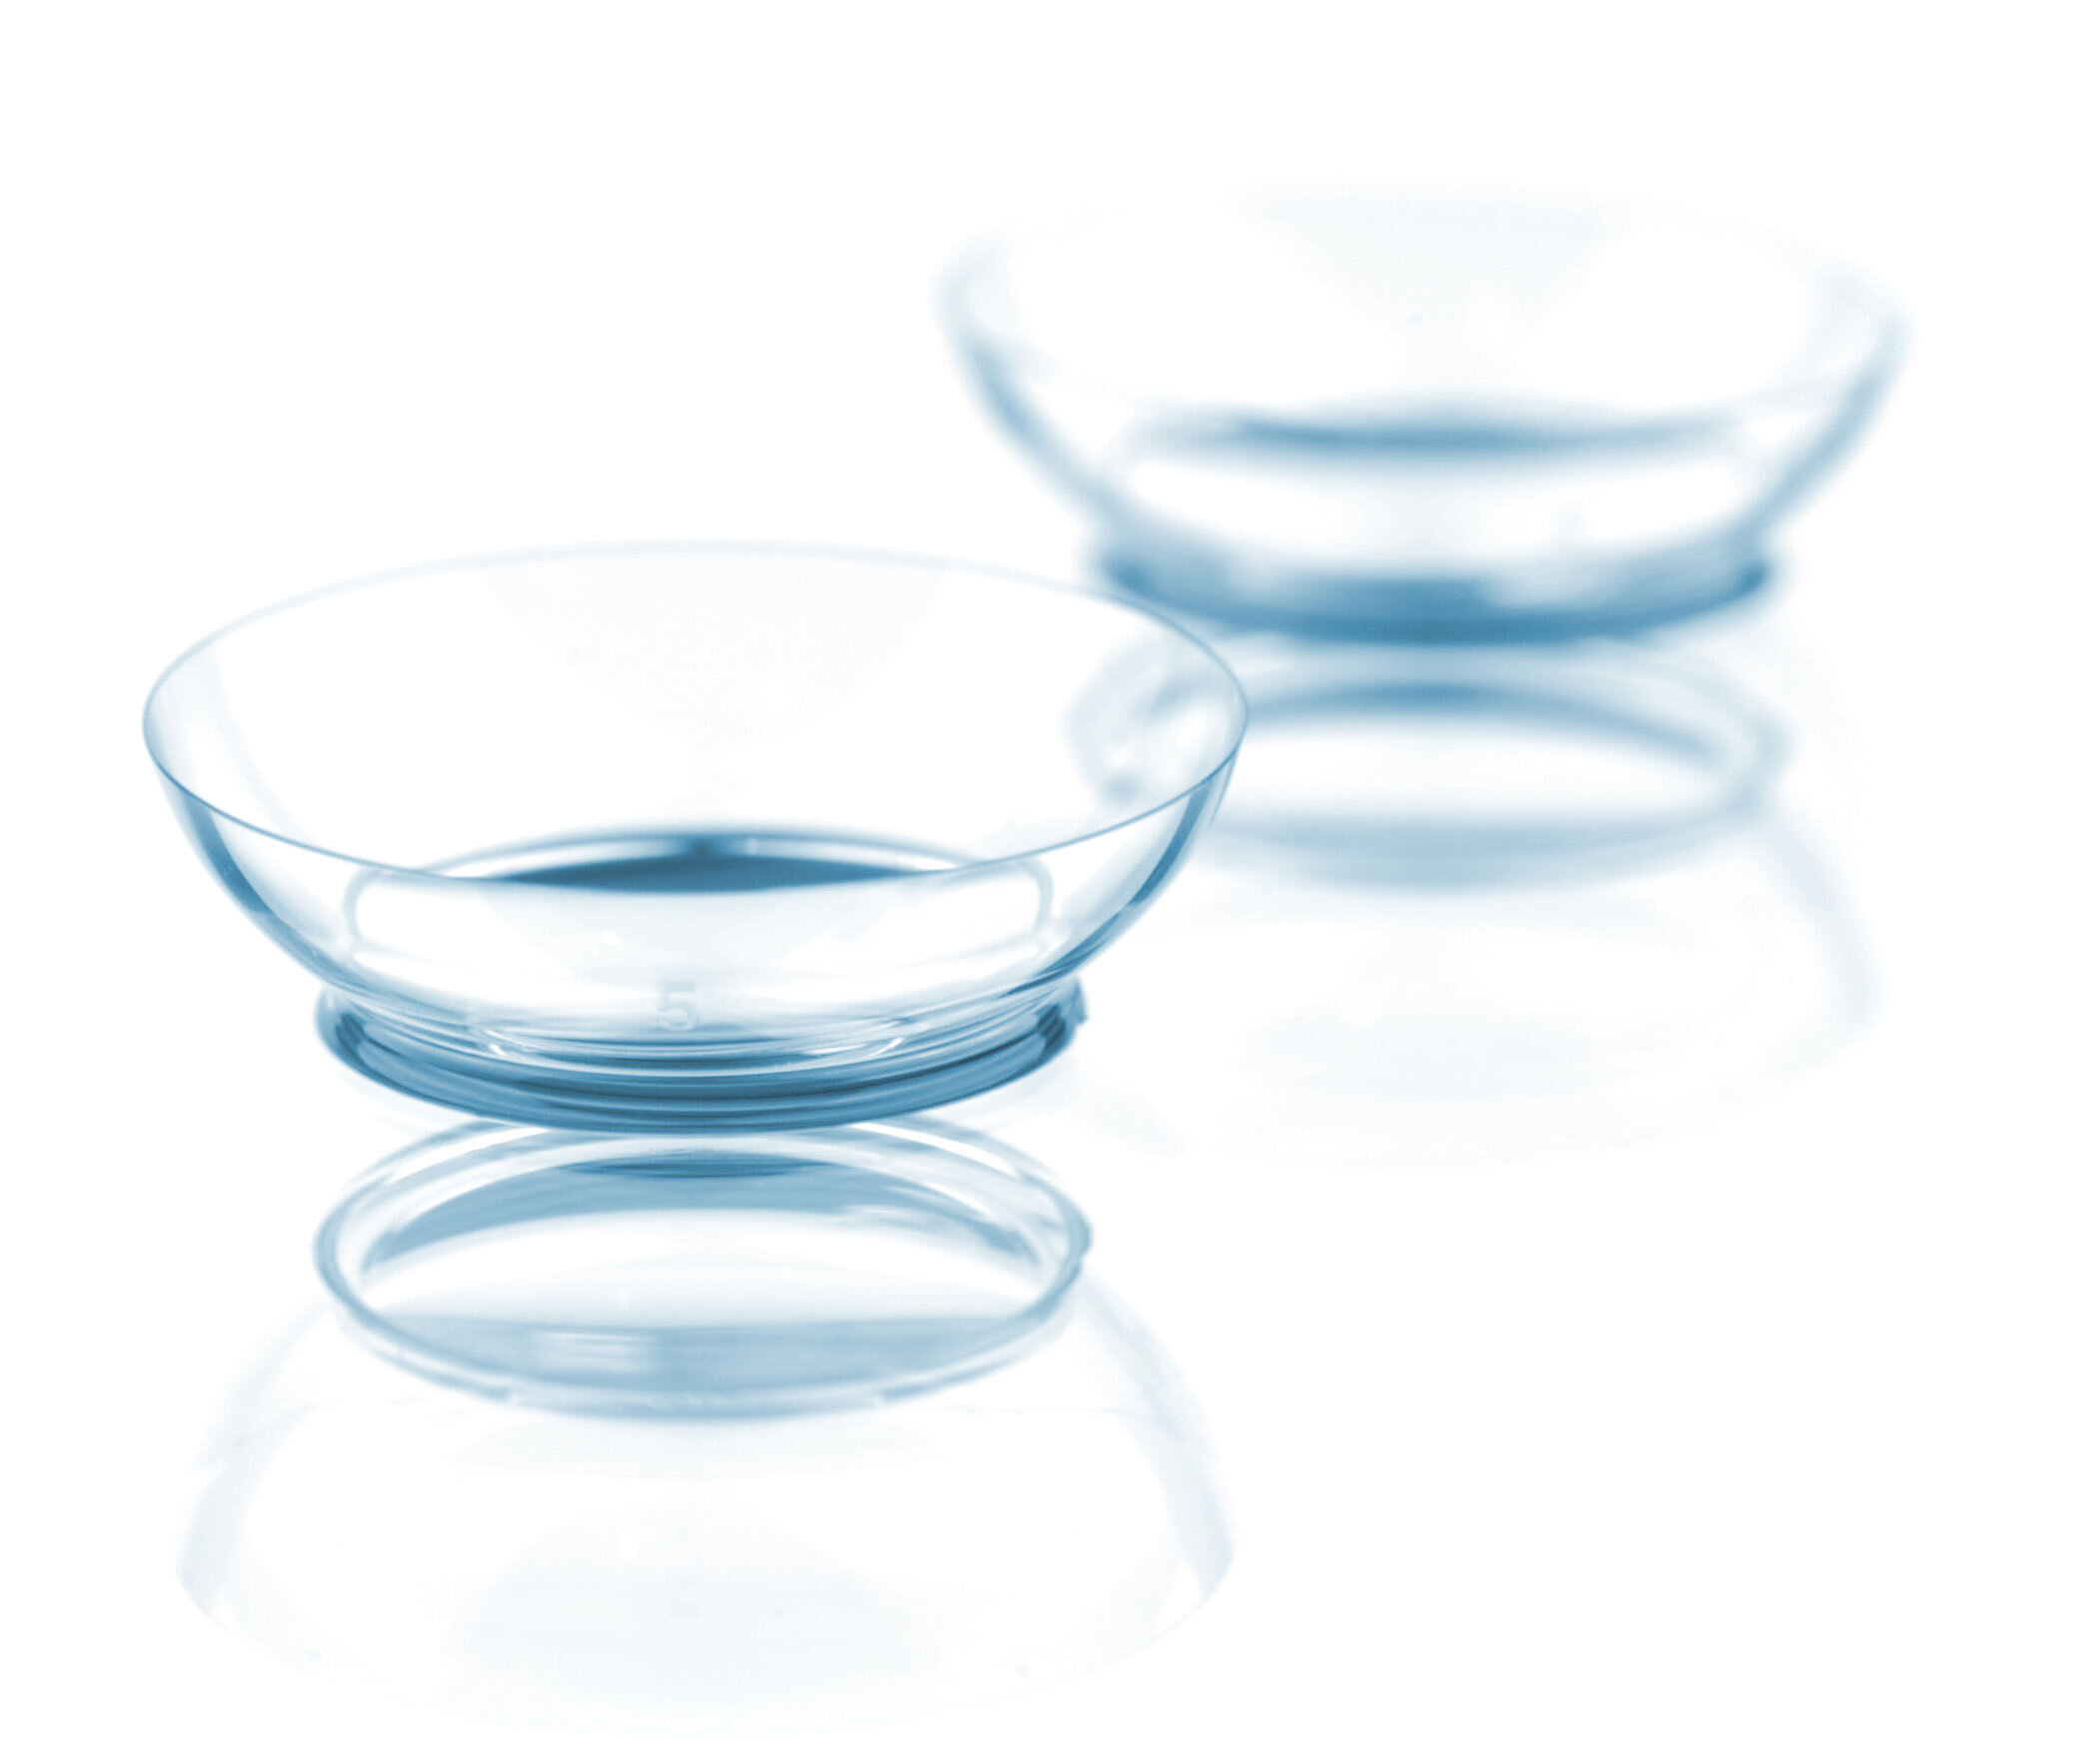 Adequate contact lenses after surface treatments